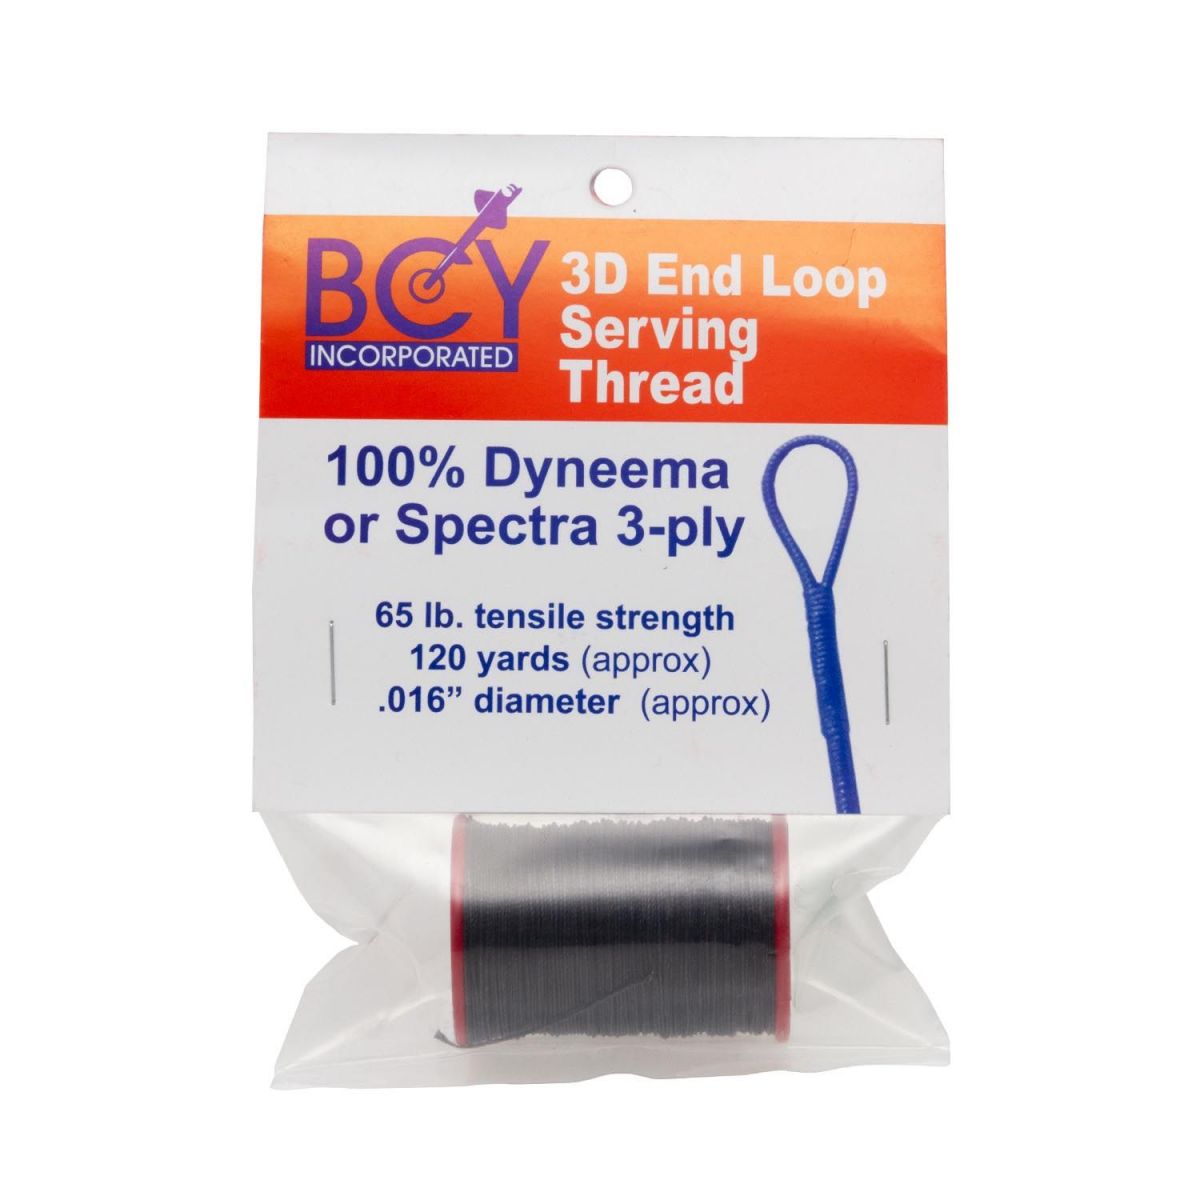 BCY Serving Thread 3D for End Servings